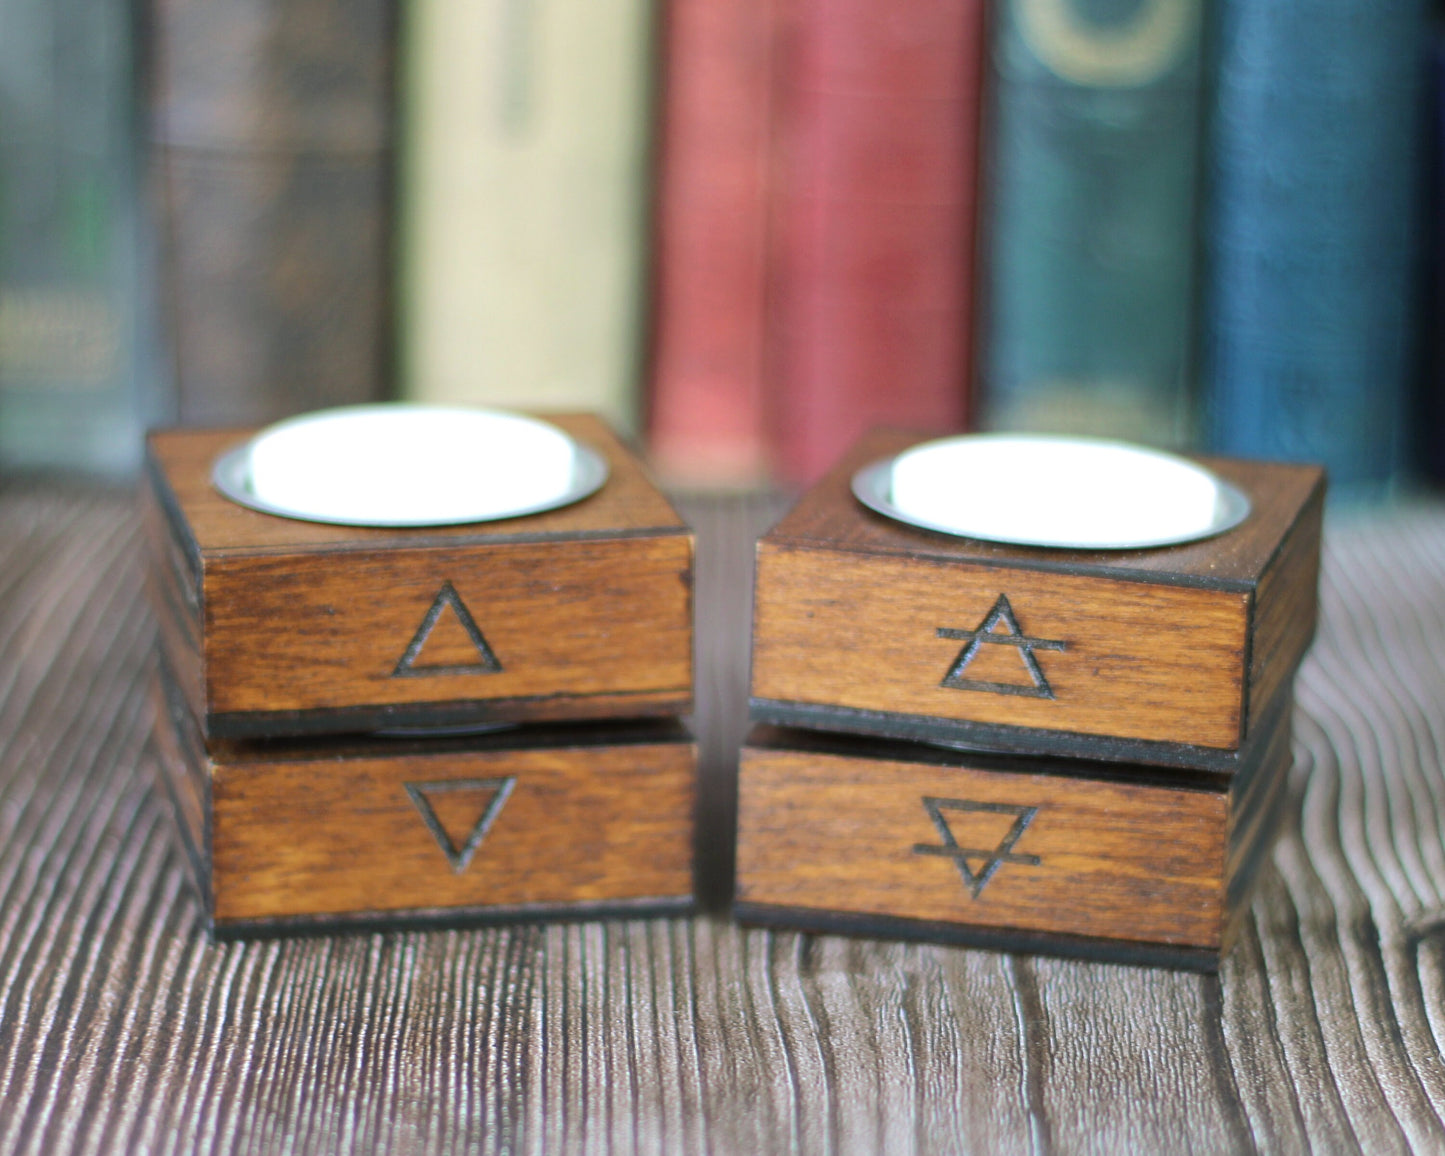 Wooden Wicca elemental candle holders for wiccan or pagan altar tools. Ritual candle holders great witchcraft starter kit or Wicca gift.